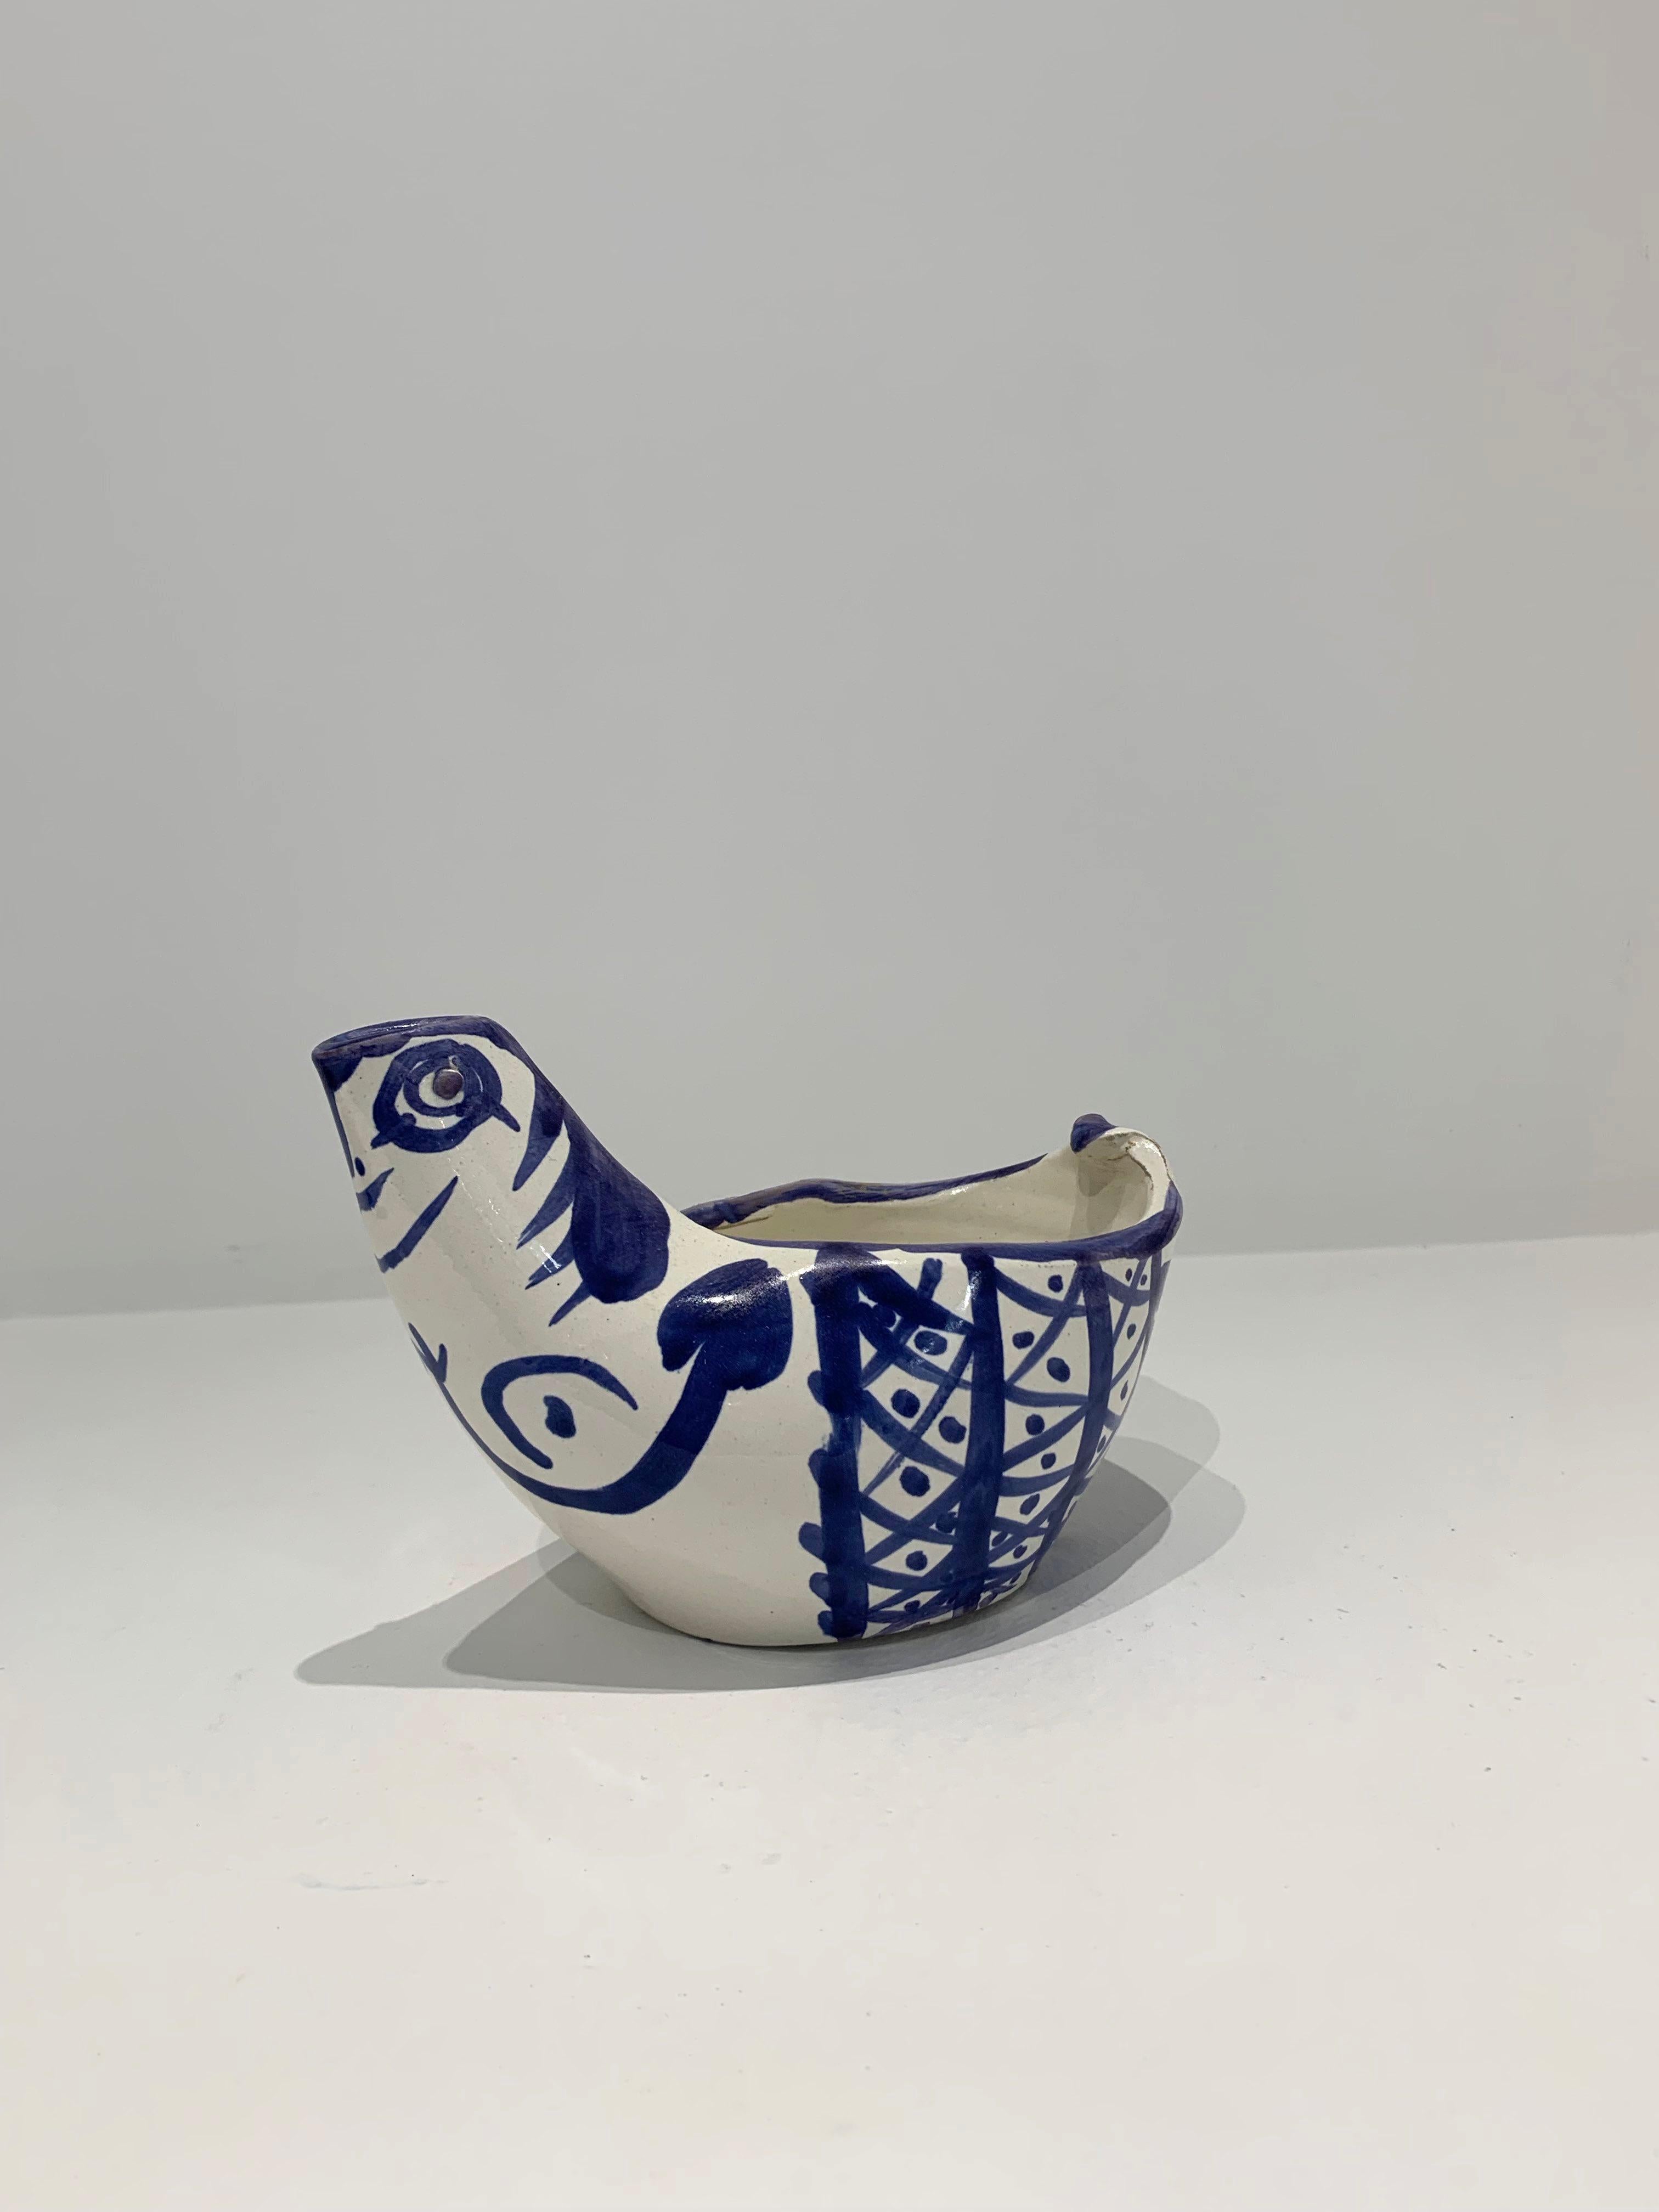 Pichet Poule, by Pablo Picasso, Pitcher, 1950's, Design, Blue, Decoration

Pichet Poule
Ed. 500 pcs
1954
Shaped piece turned in white faience earth with blue oxide decoration on white enamel
13.5 x 17 x 10 cm
Stamped under the base: Madoura plein